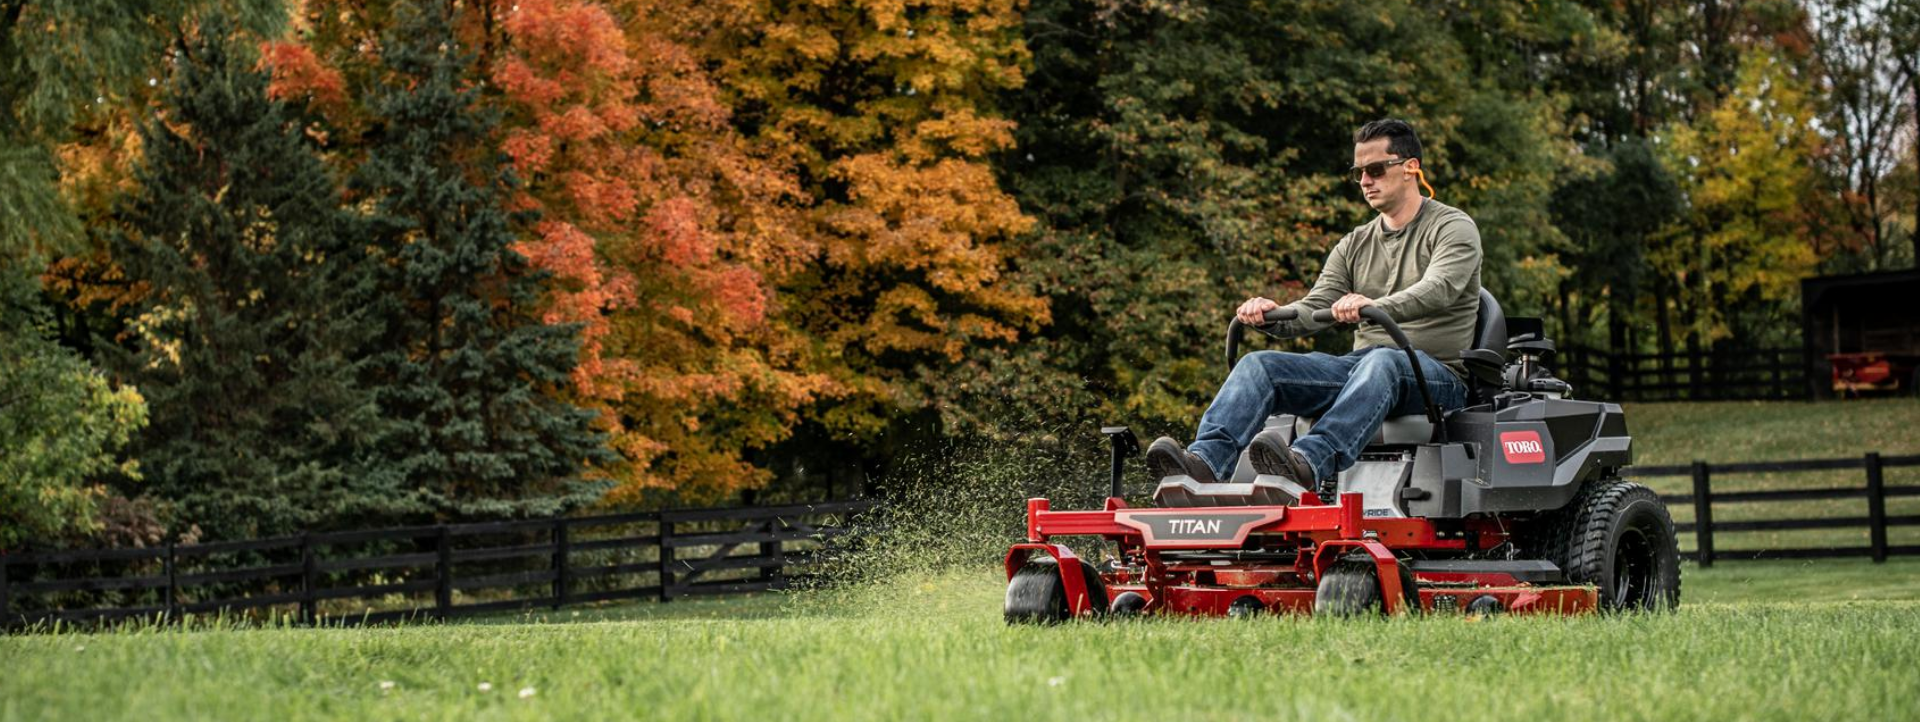 Image of man on Toro zero turn mower, mowing lawn in front of a fence